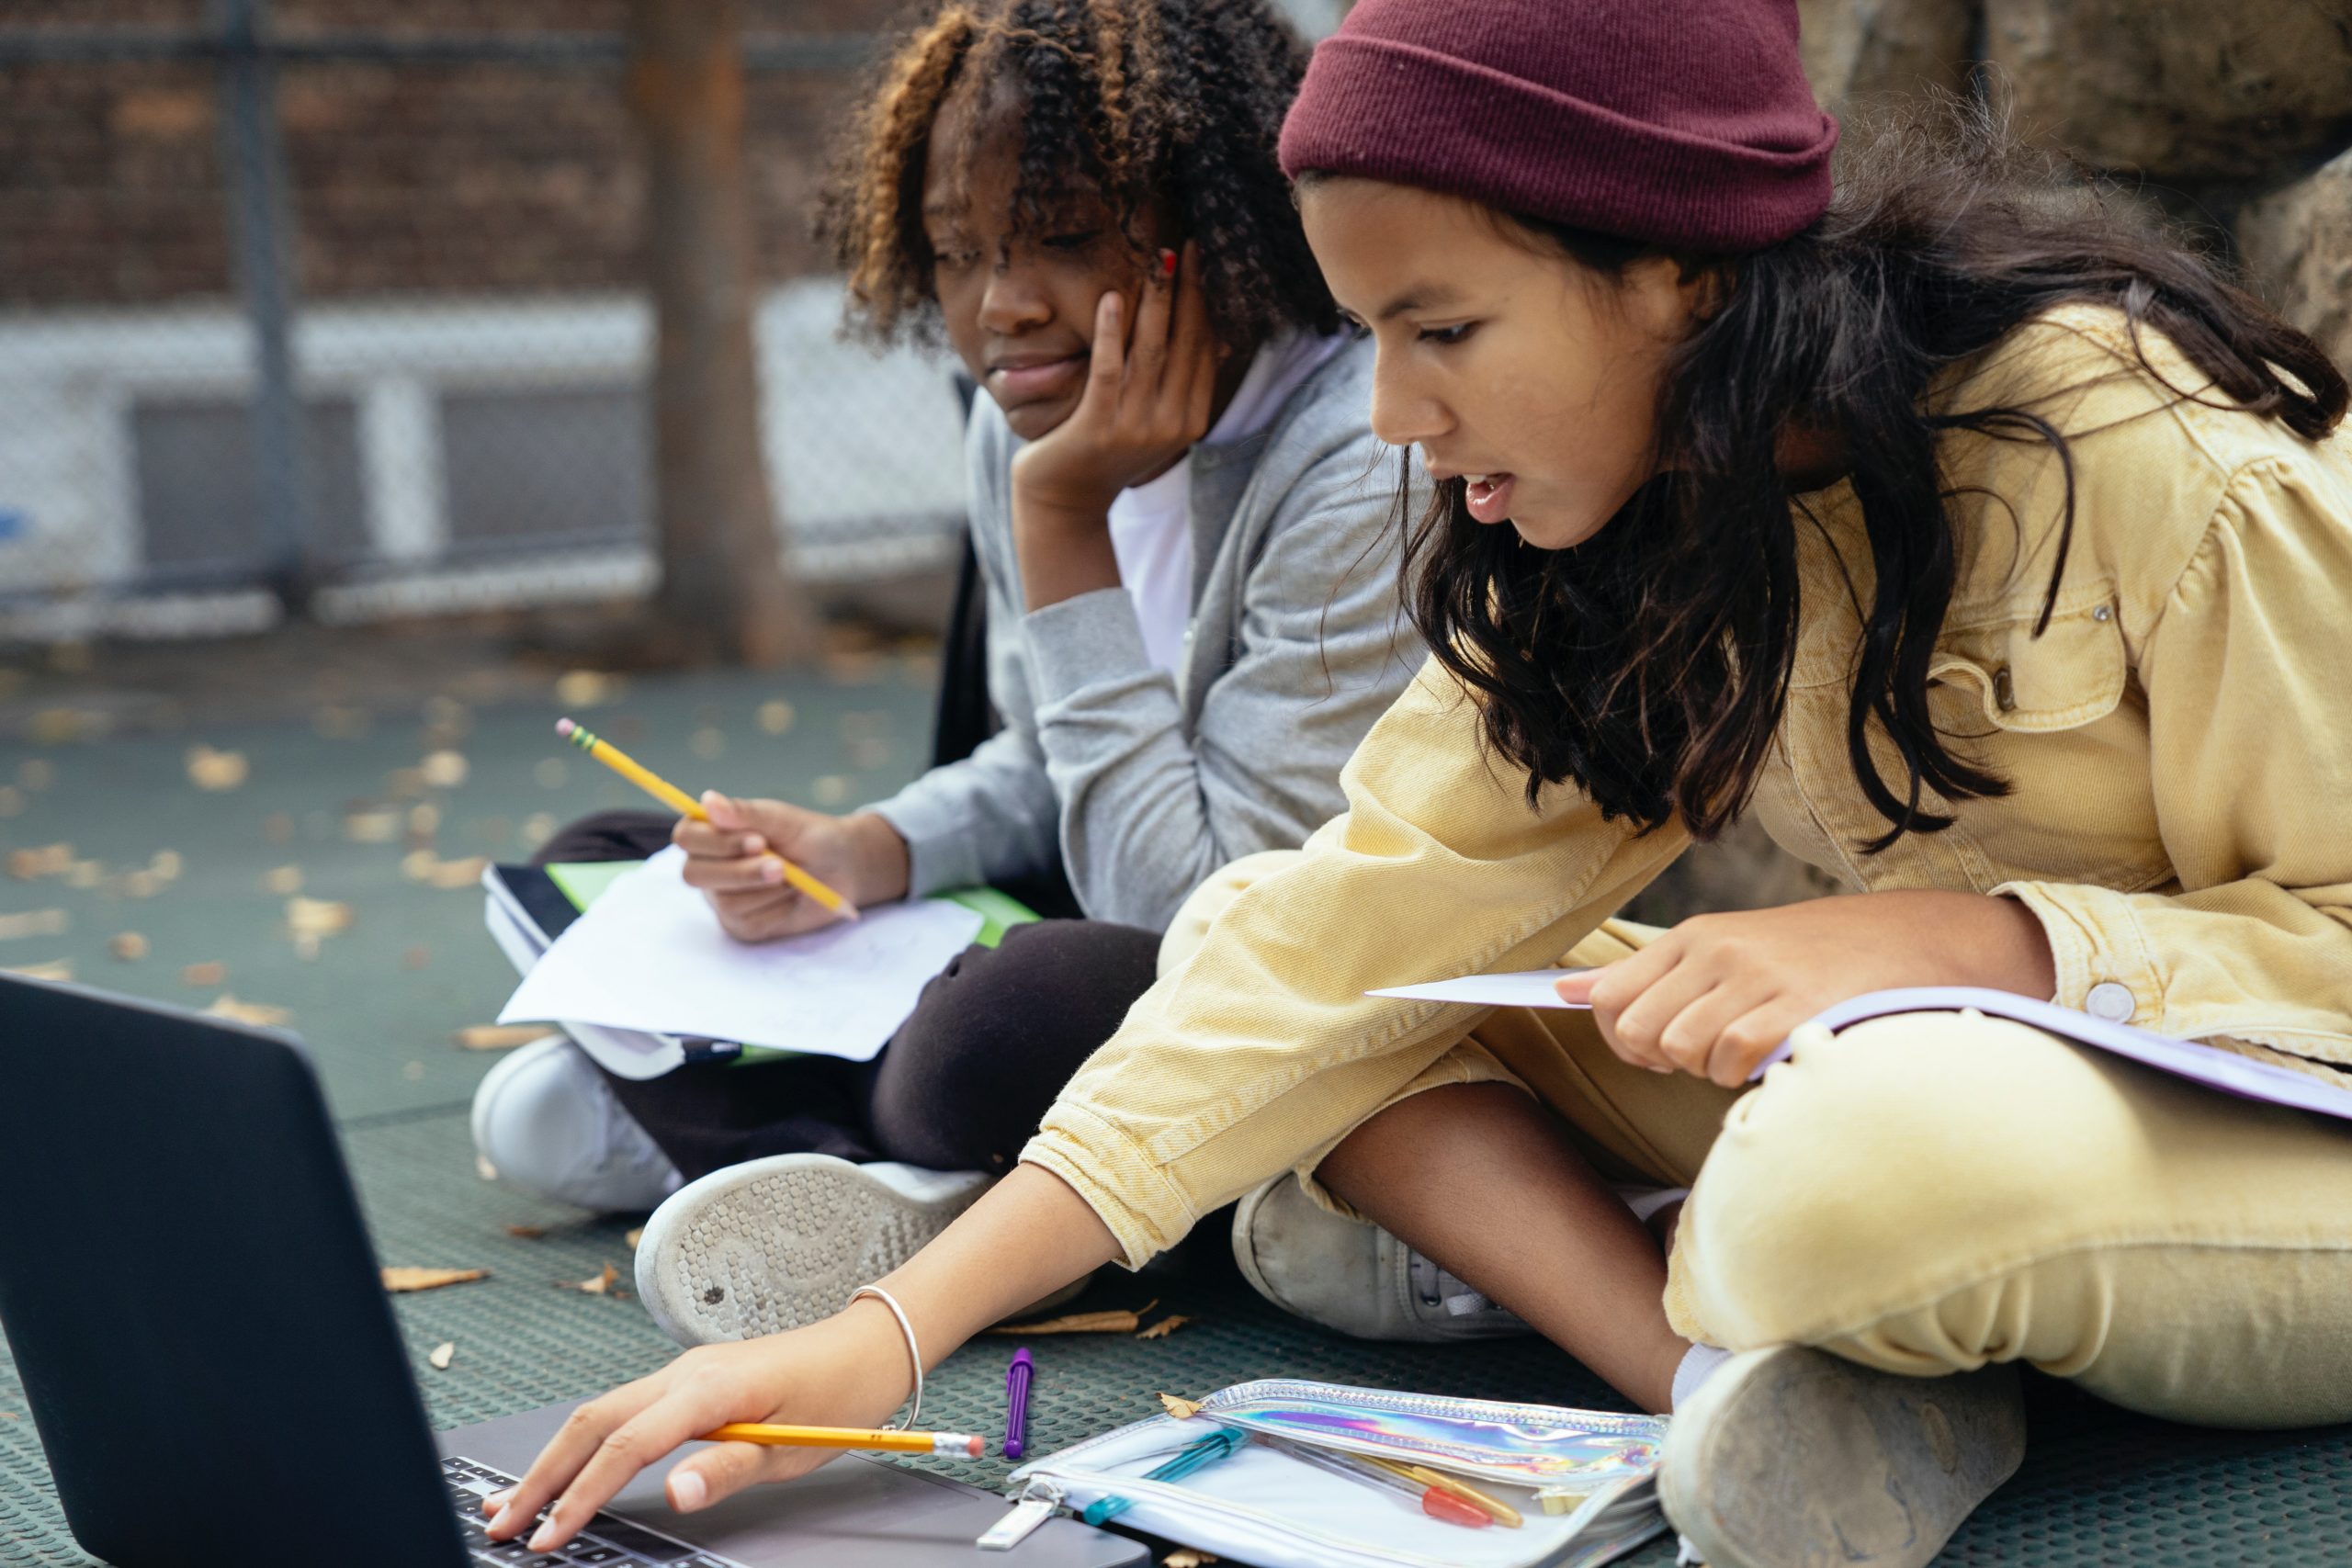 Two young students working together on an assignment outdoors.